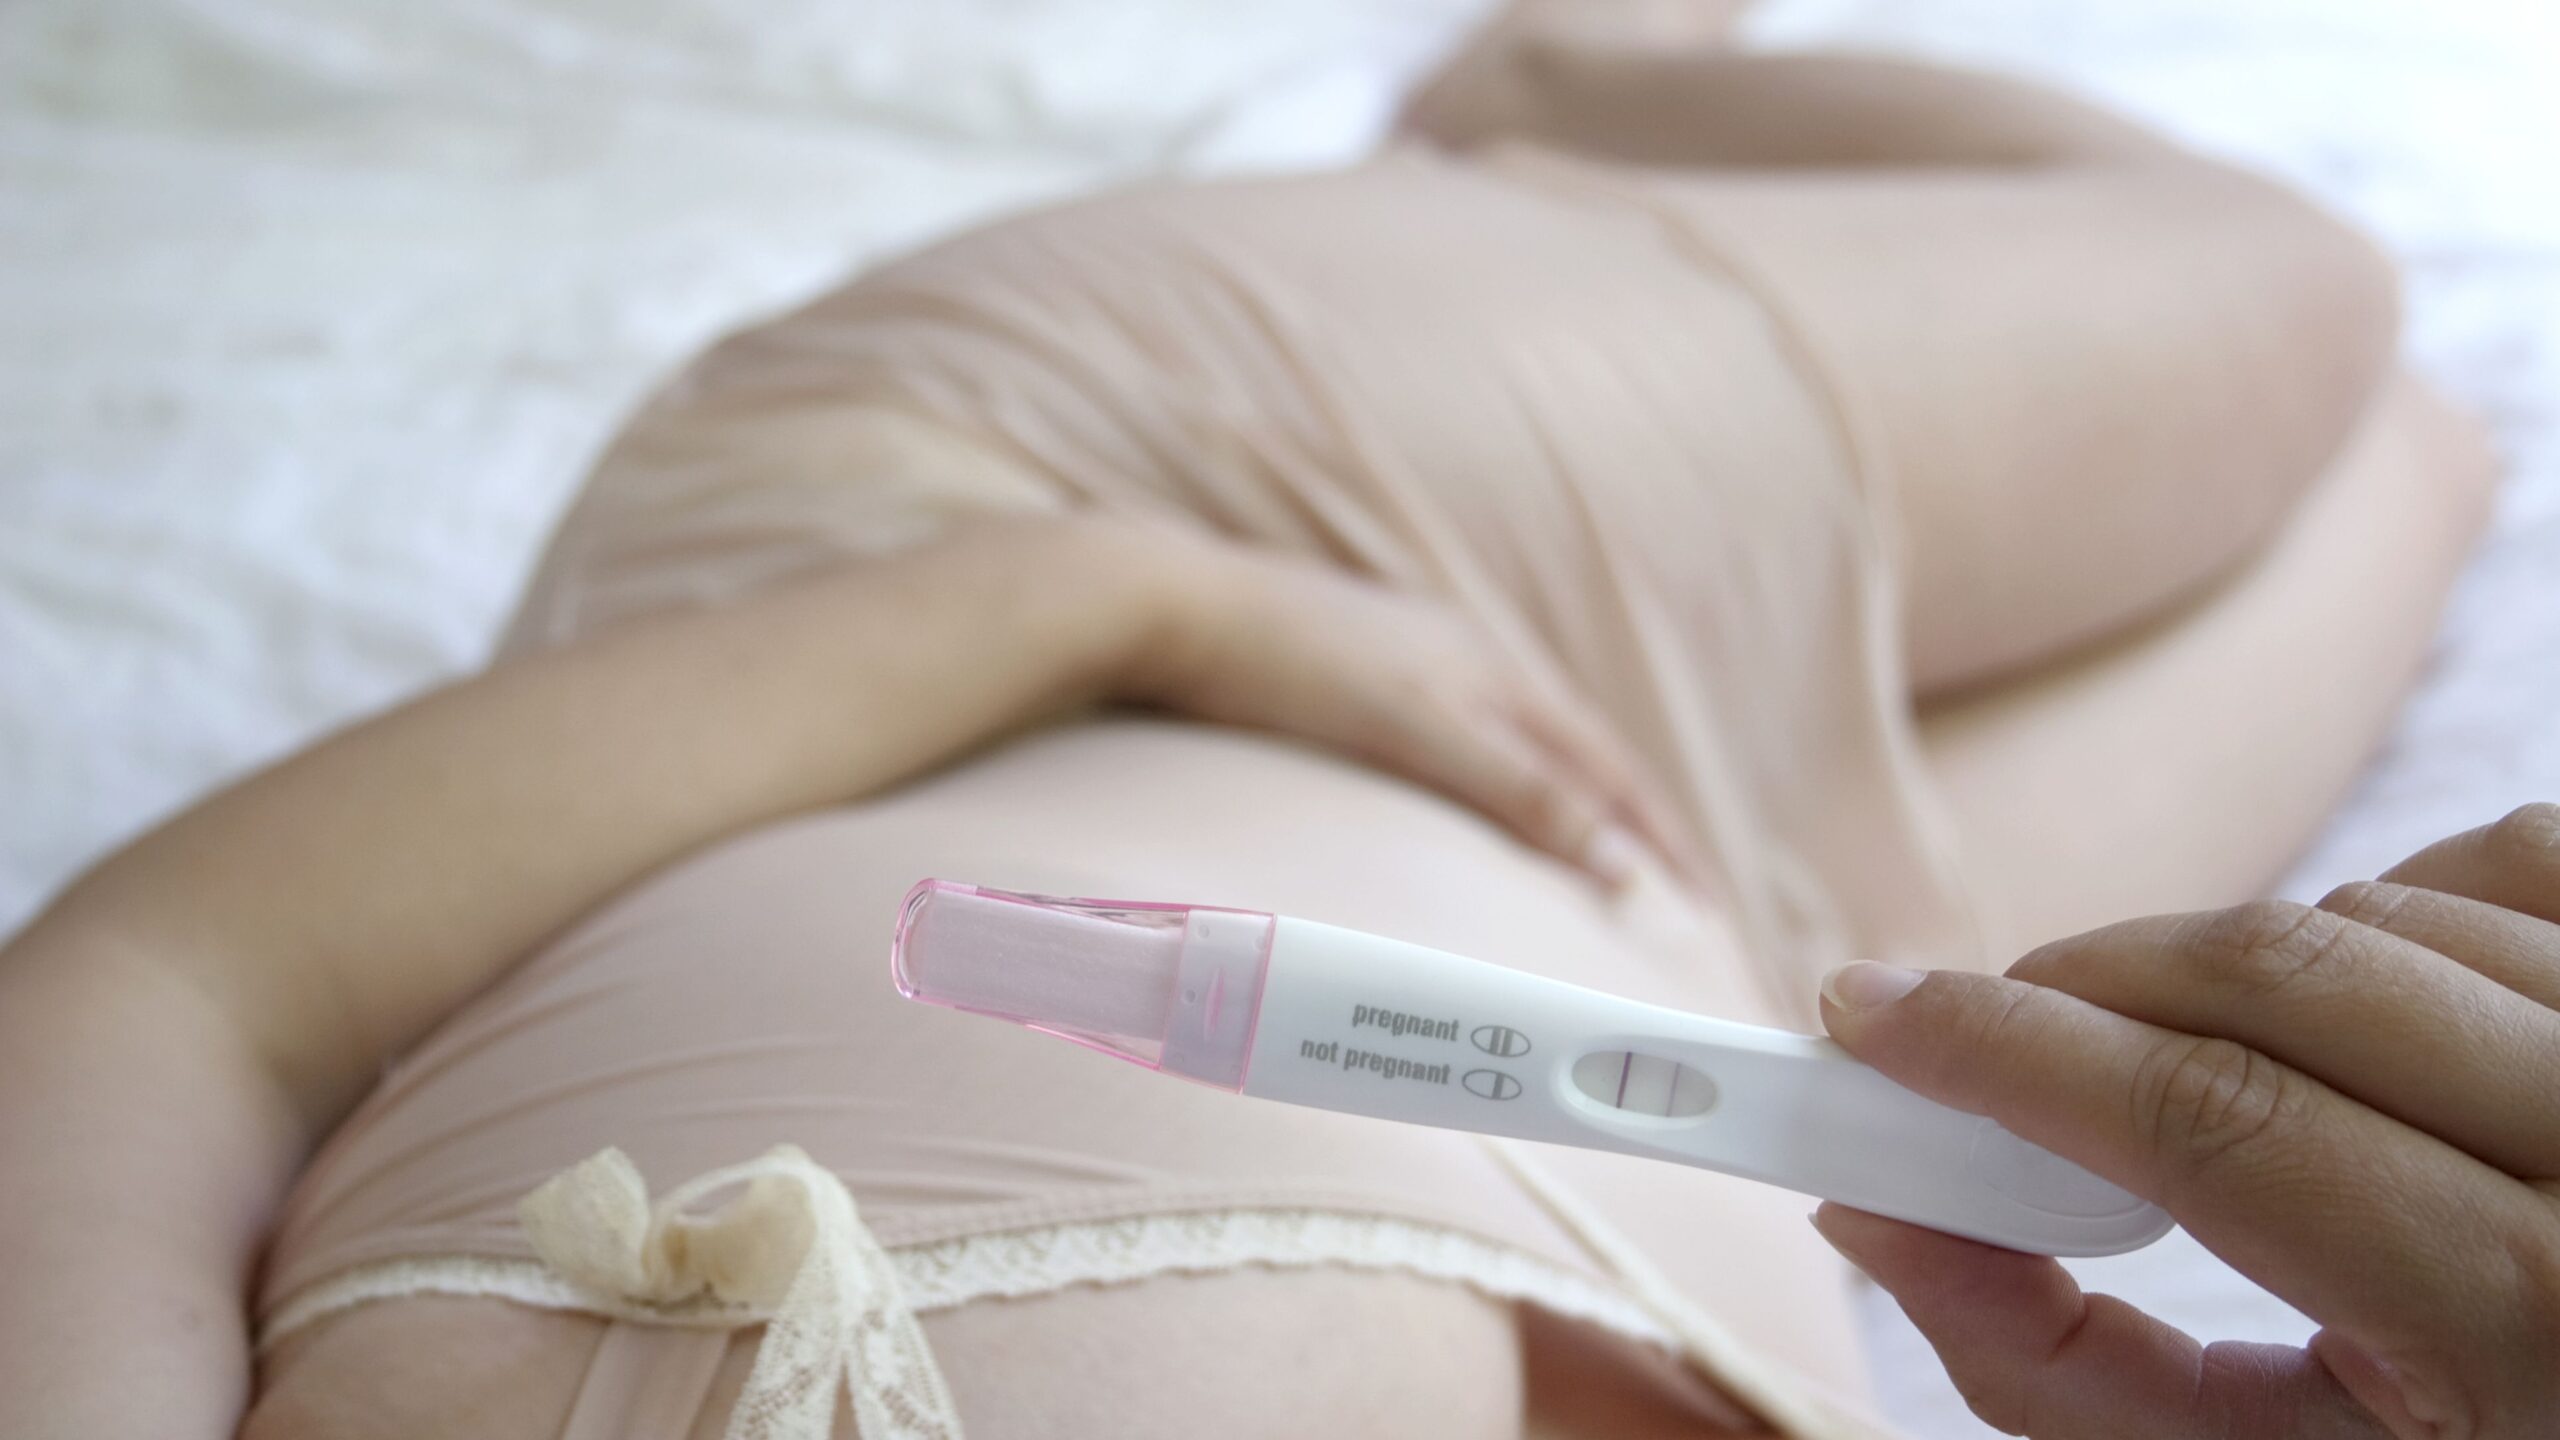 6 Routine Tests During Pregnancy That Are Important